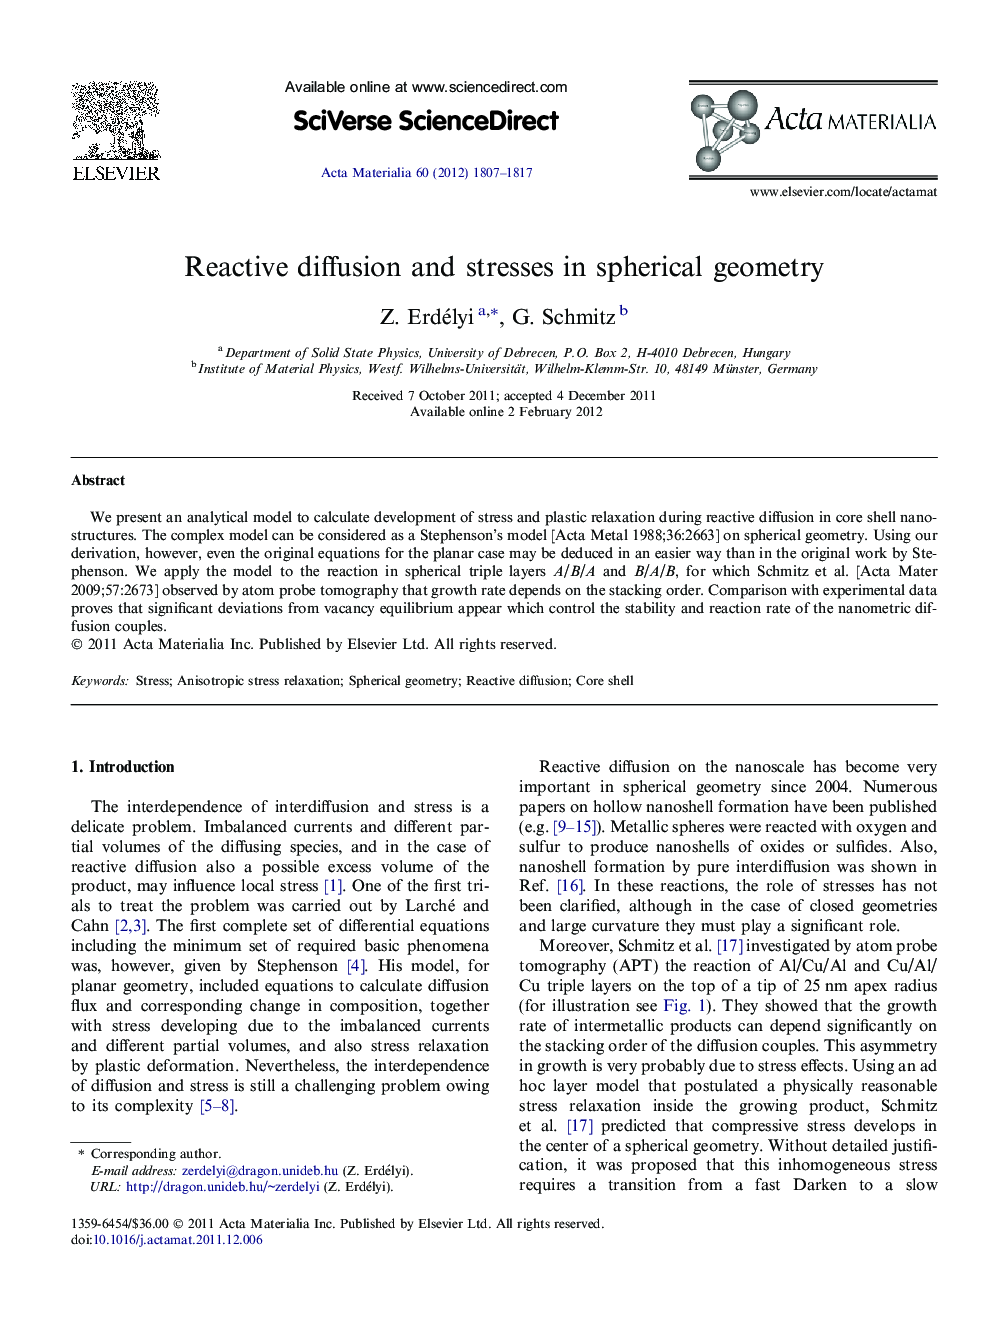 Reactive diffusion and stresses in spherical geometry